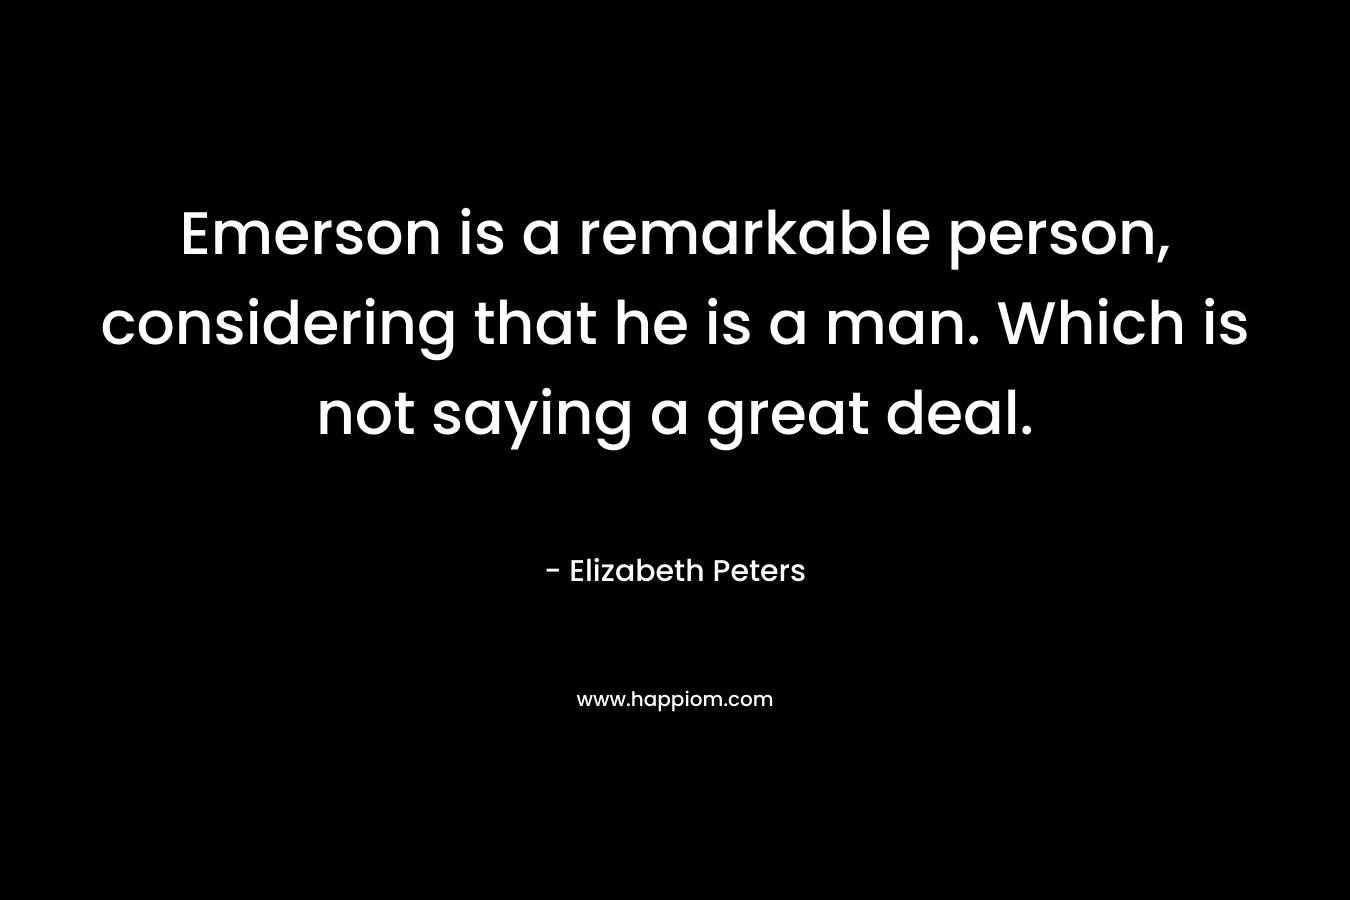 Emerson is a remarkable person, considering that he is a man. Which is not saying a great deal.